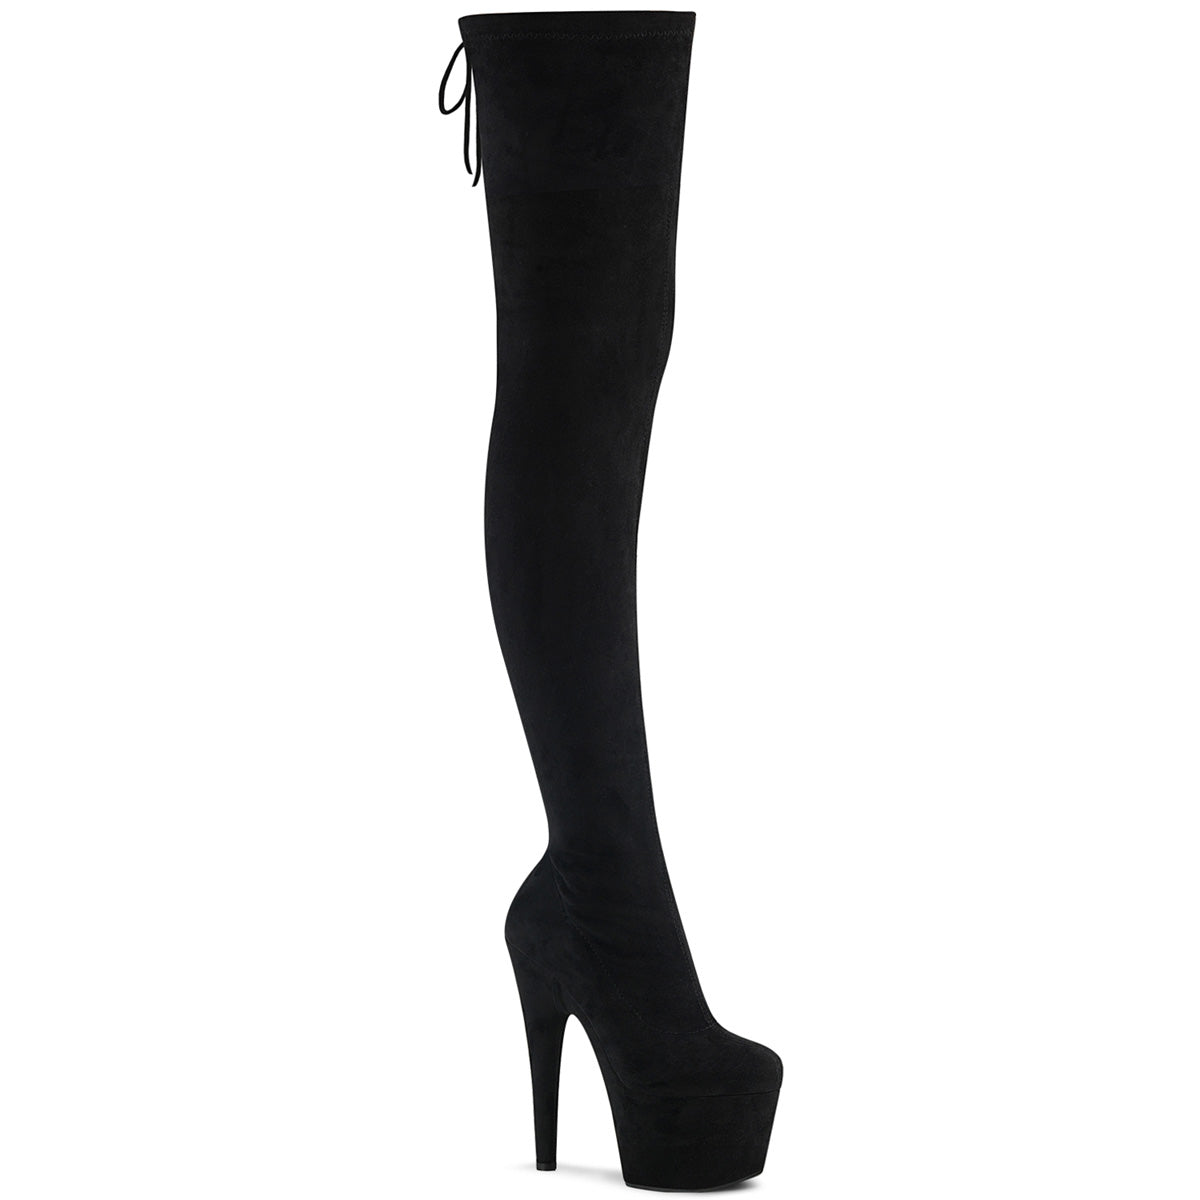 ADORE-3008 Pleasers Black Exotic Dancing Thigh High Boots